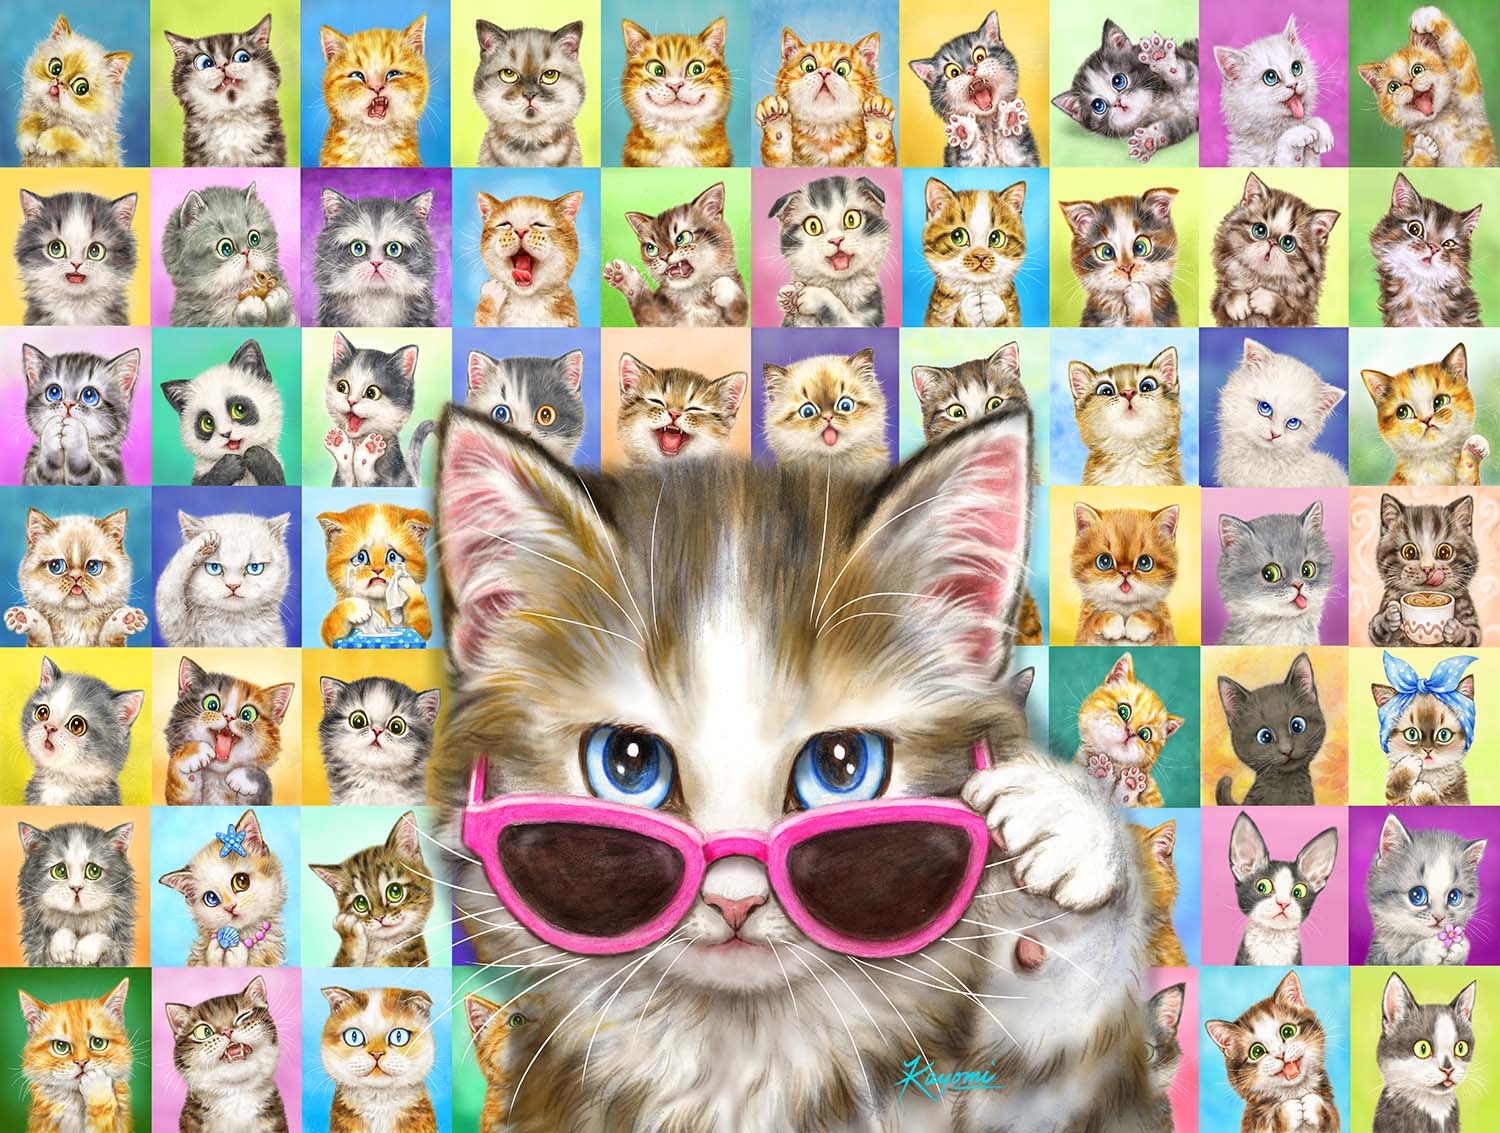 Cool Cats Jigsaw Puzzle - 550 PC Cats Jigsaw Puzzle